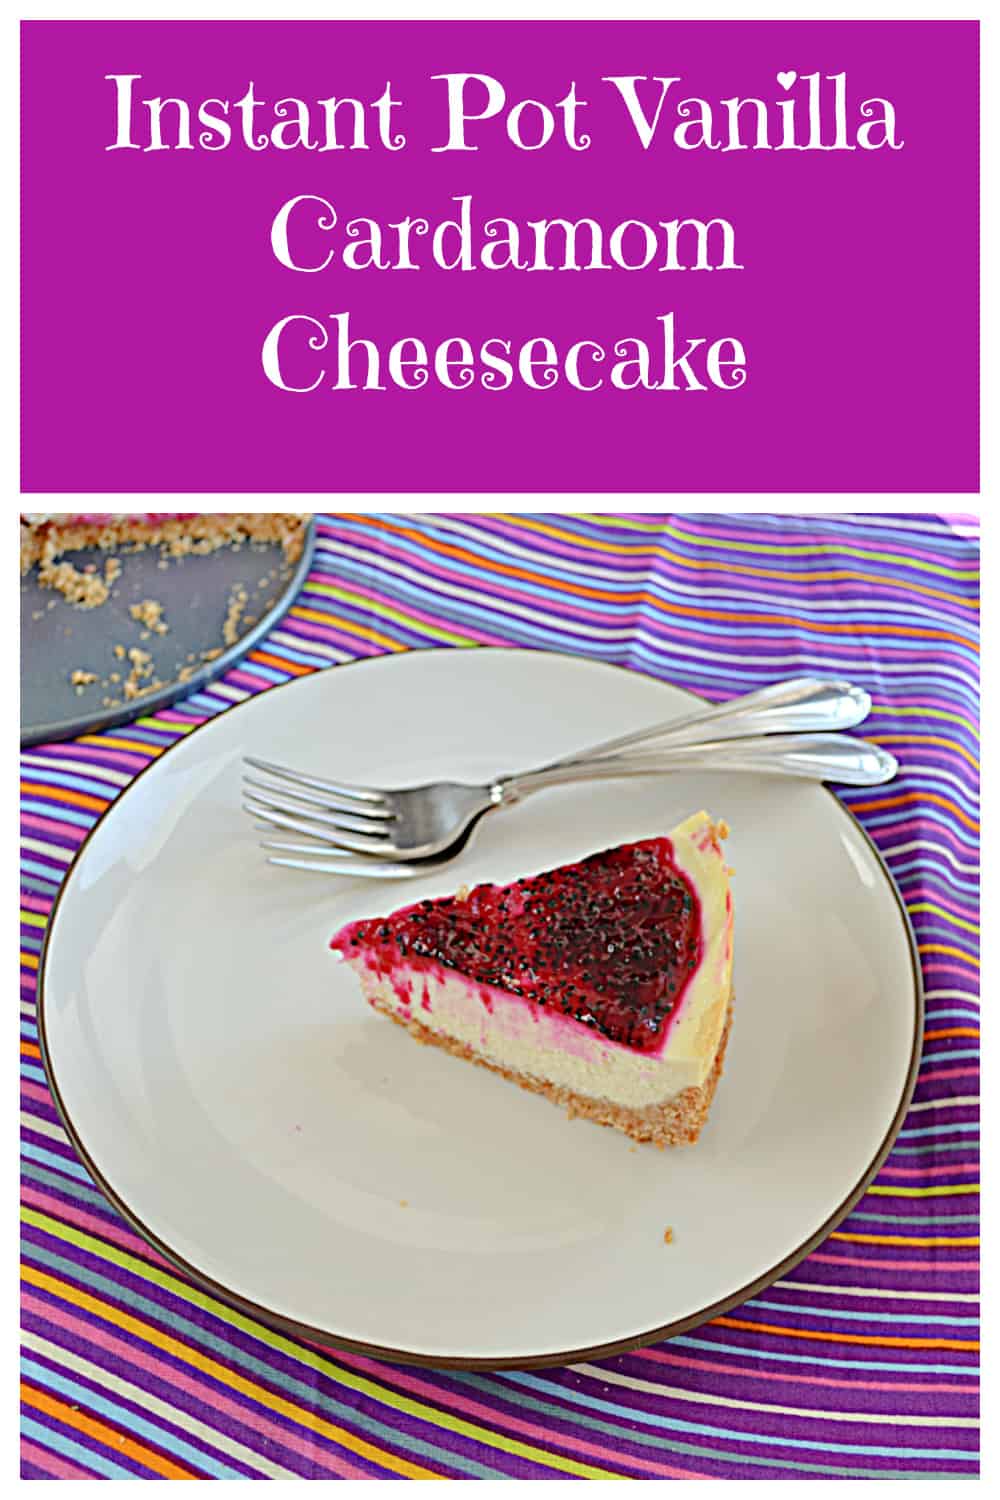 Pin Image: Text title, a plate with a slice of cheesecake, dragon fruit jam, and two forks.